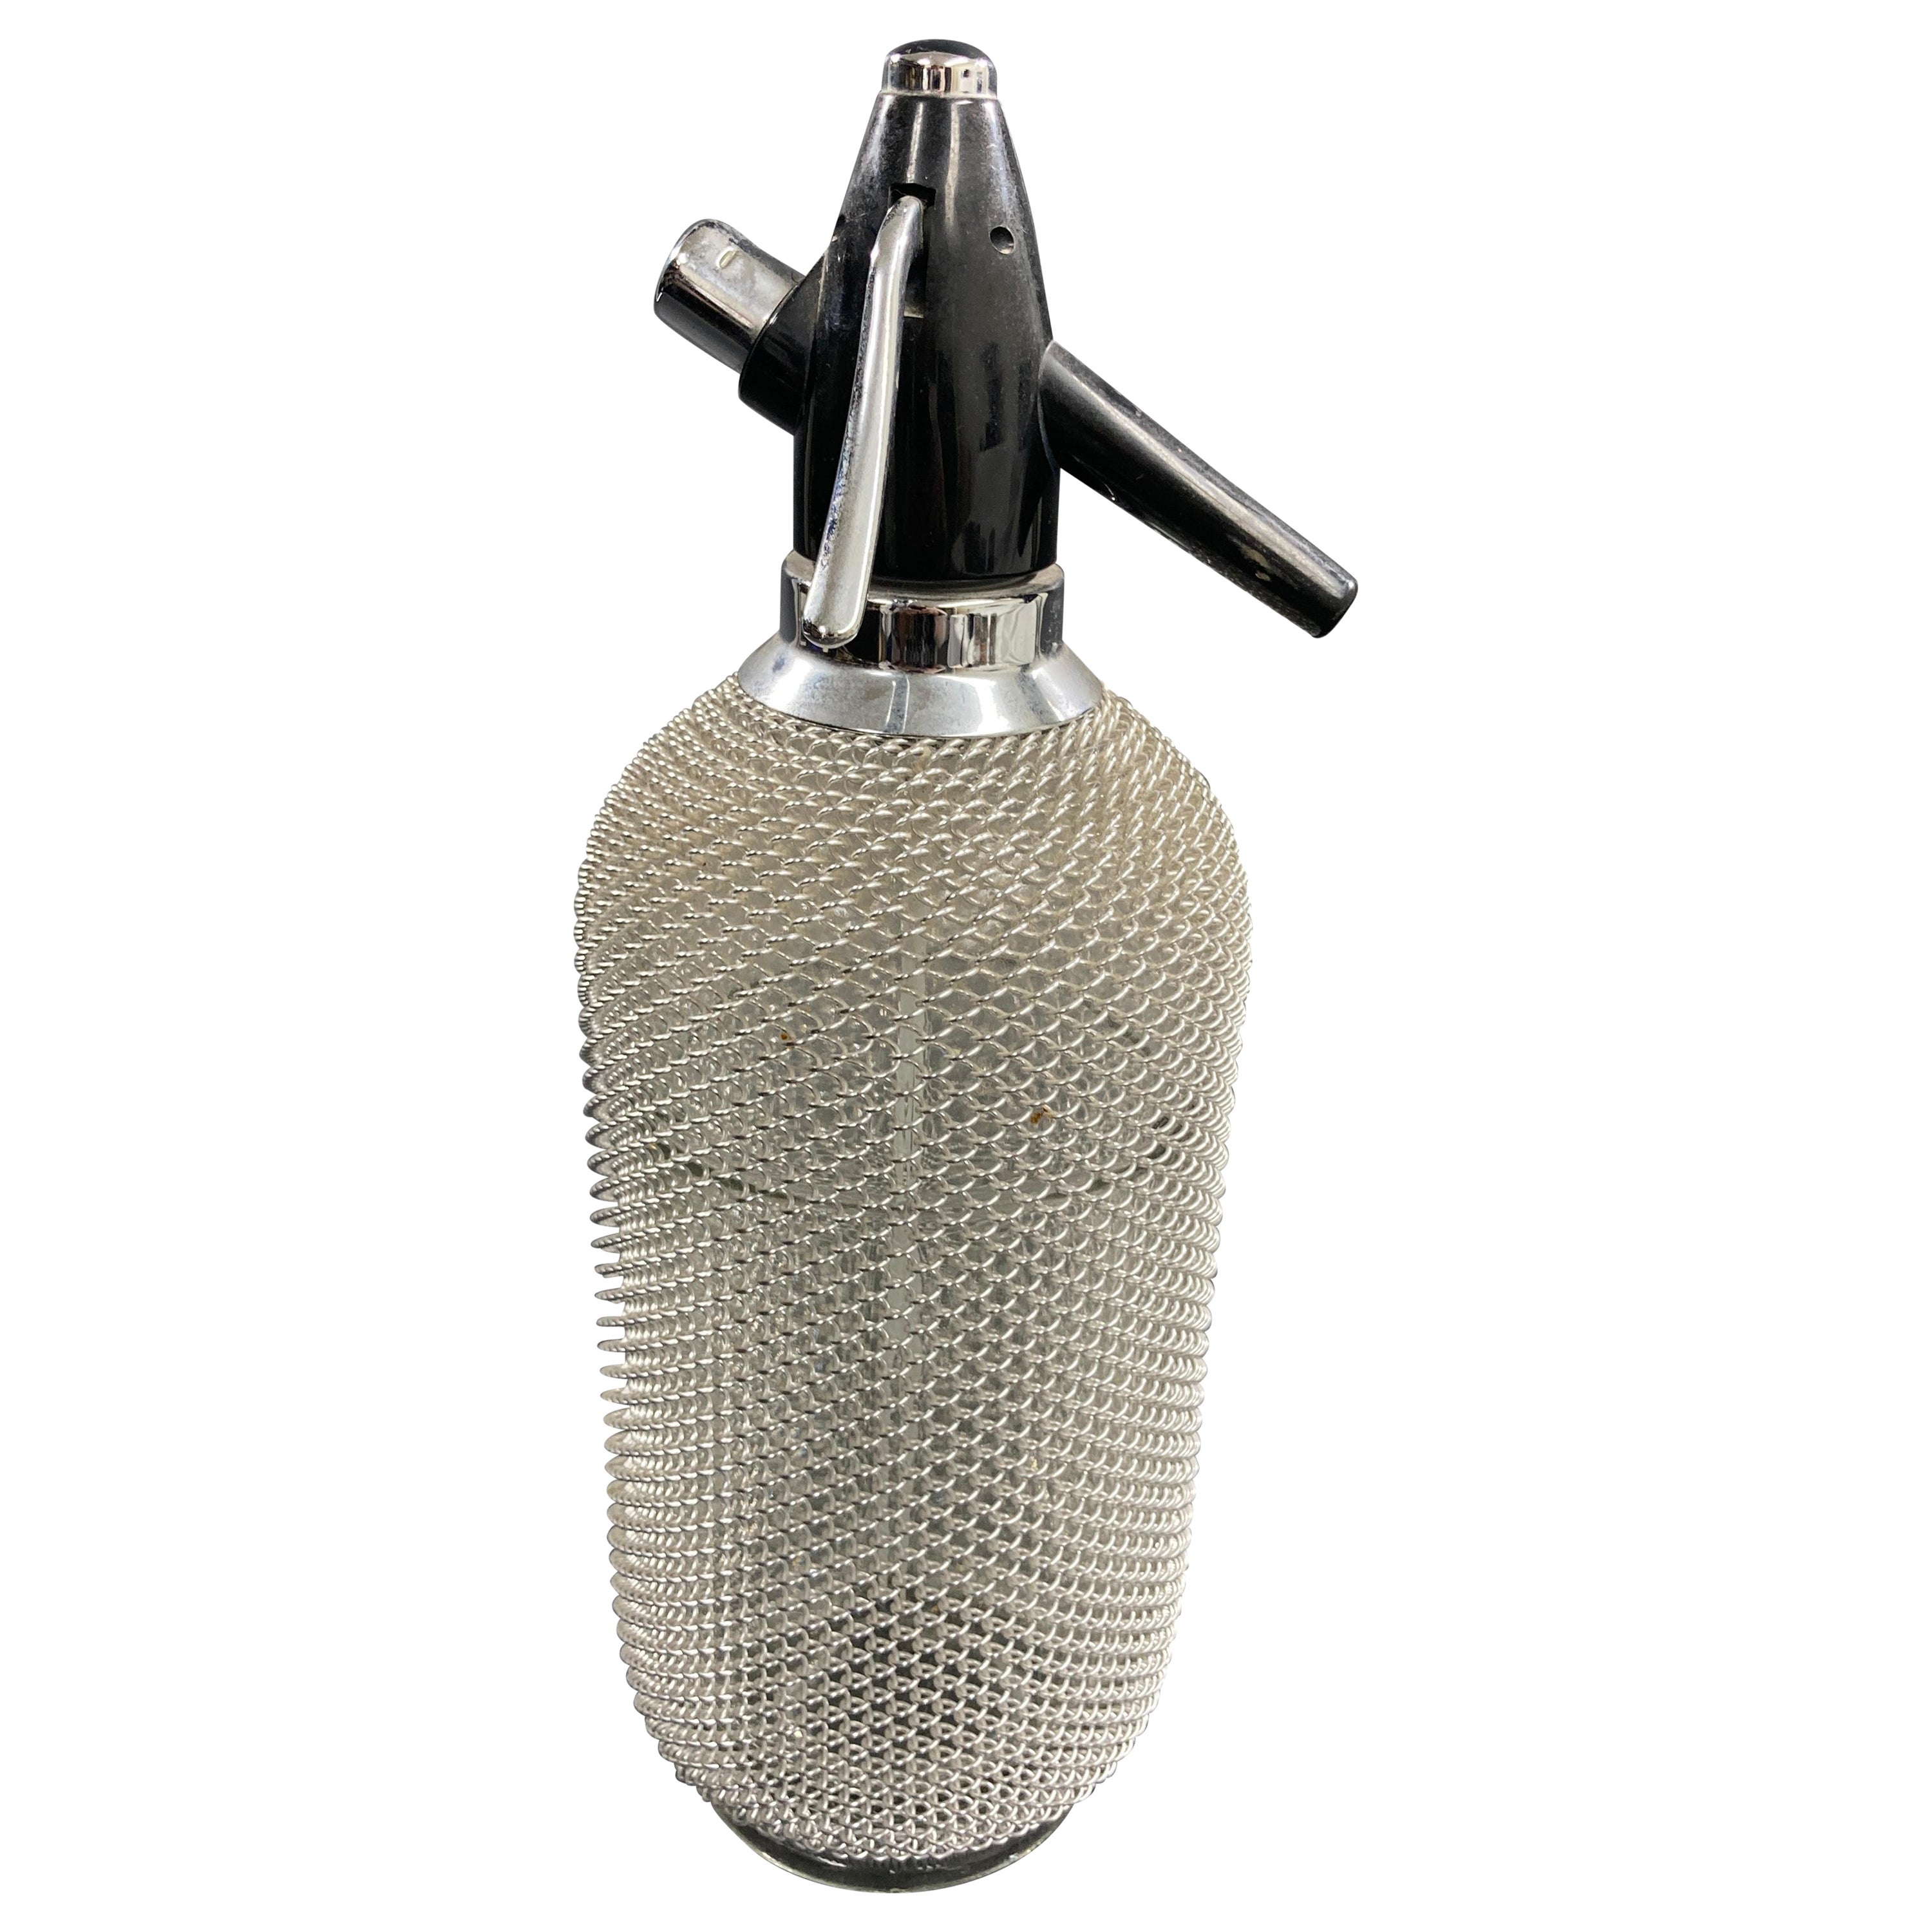 Soda Siphon - 12 For Sale on 1stDibs | soda siphons for sale 